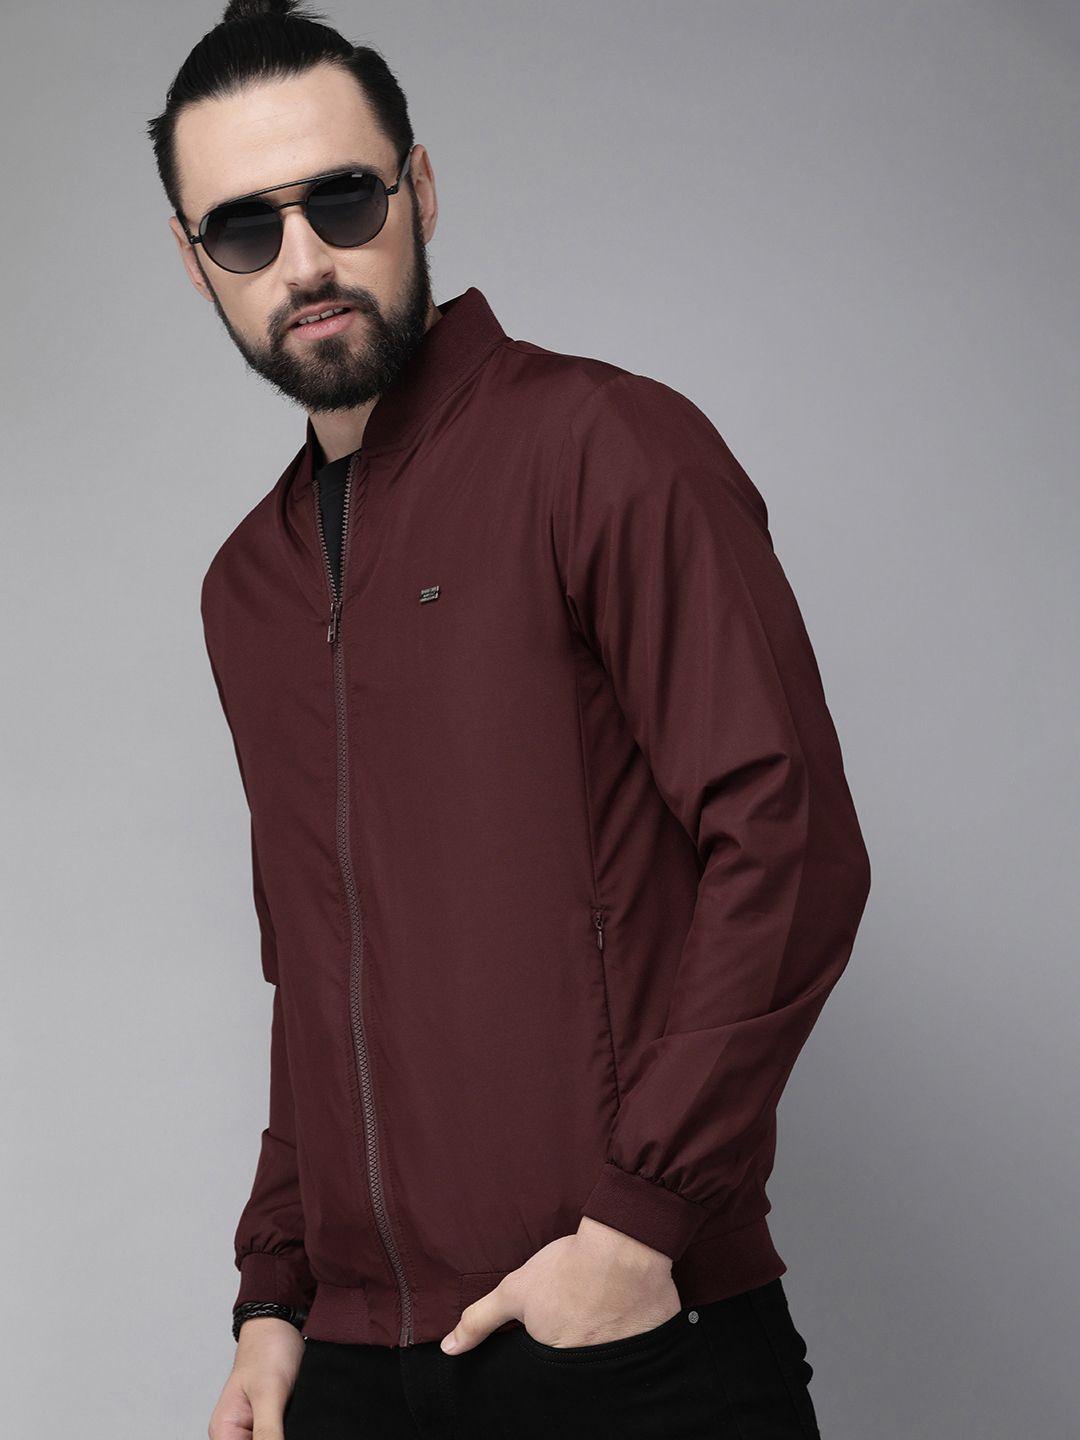 the roadster lifestyle co men maroon solid jacket